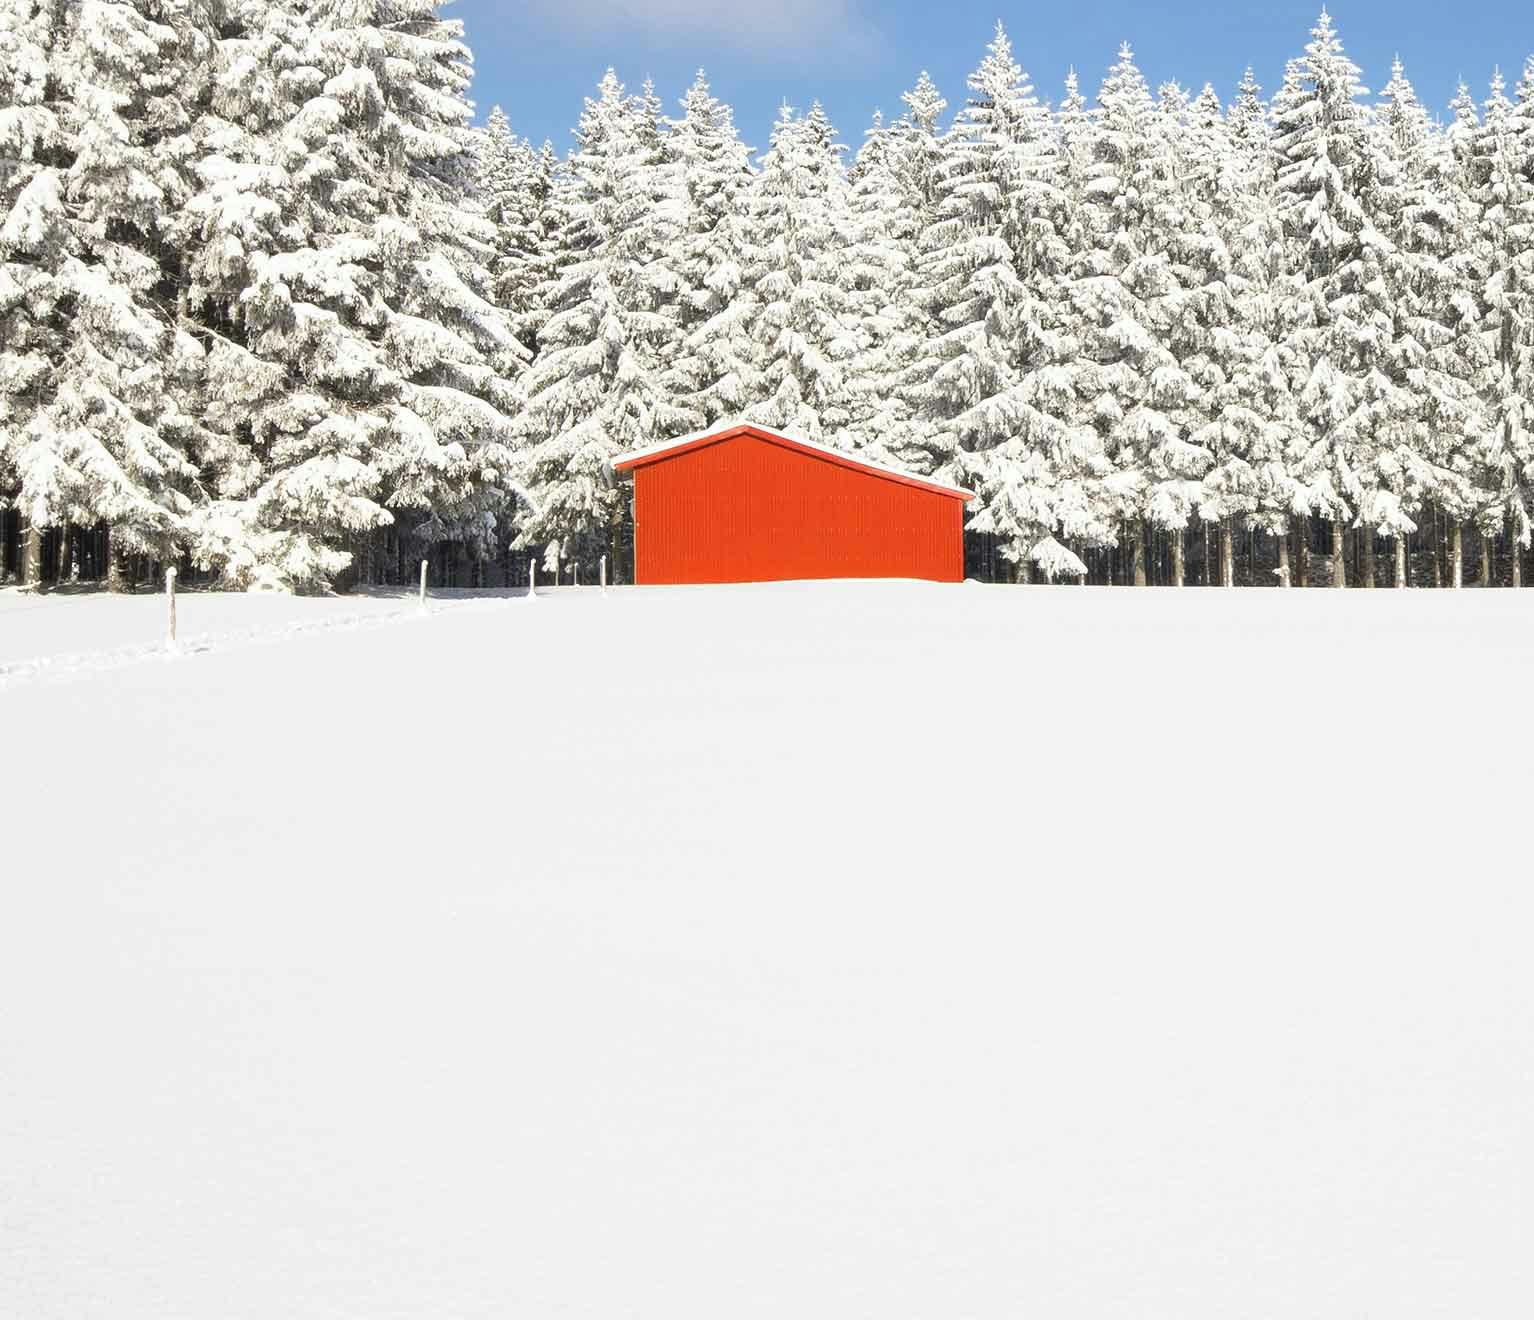 Image of an outbuilding surrounded by snow covered pine trees.